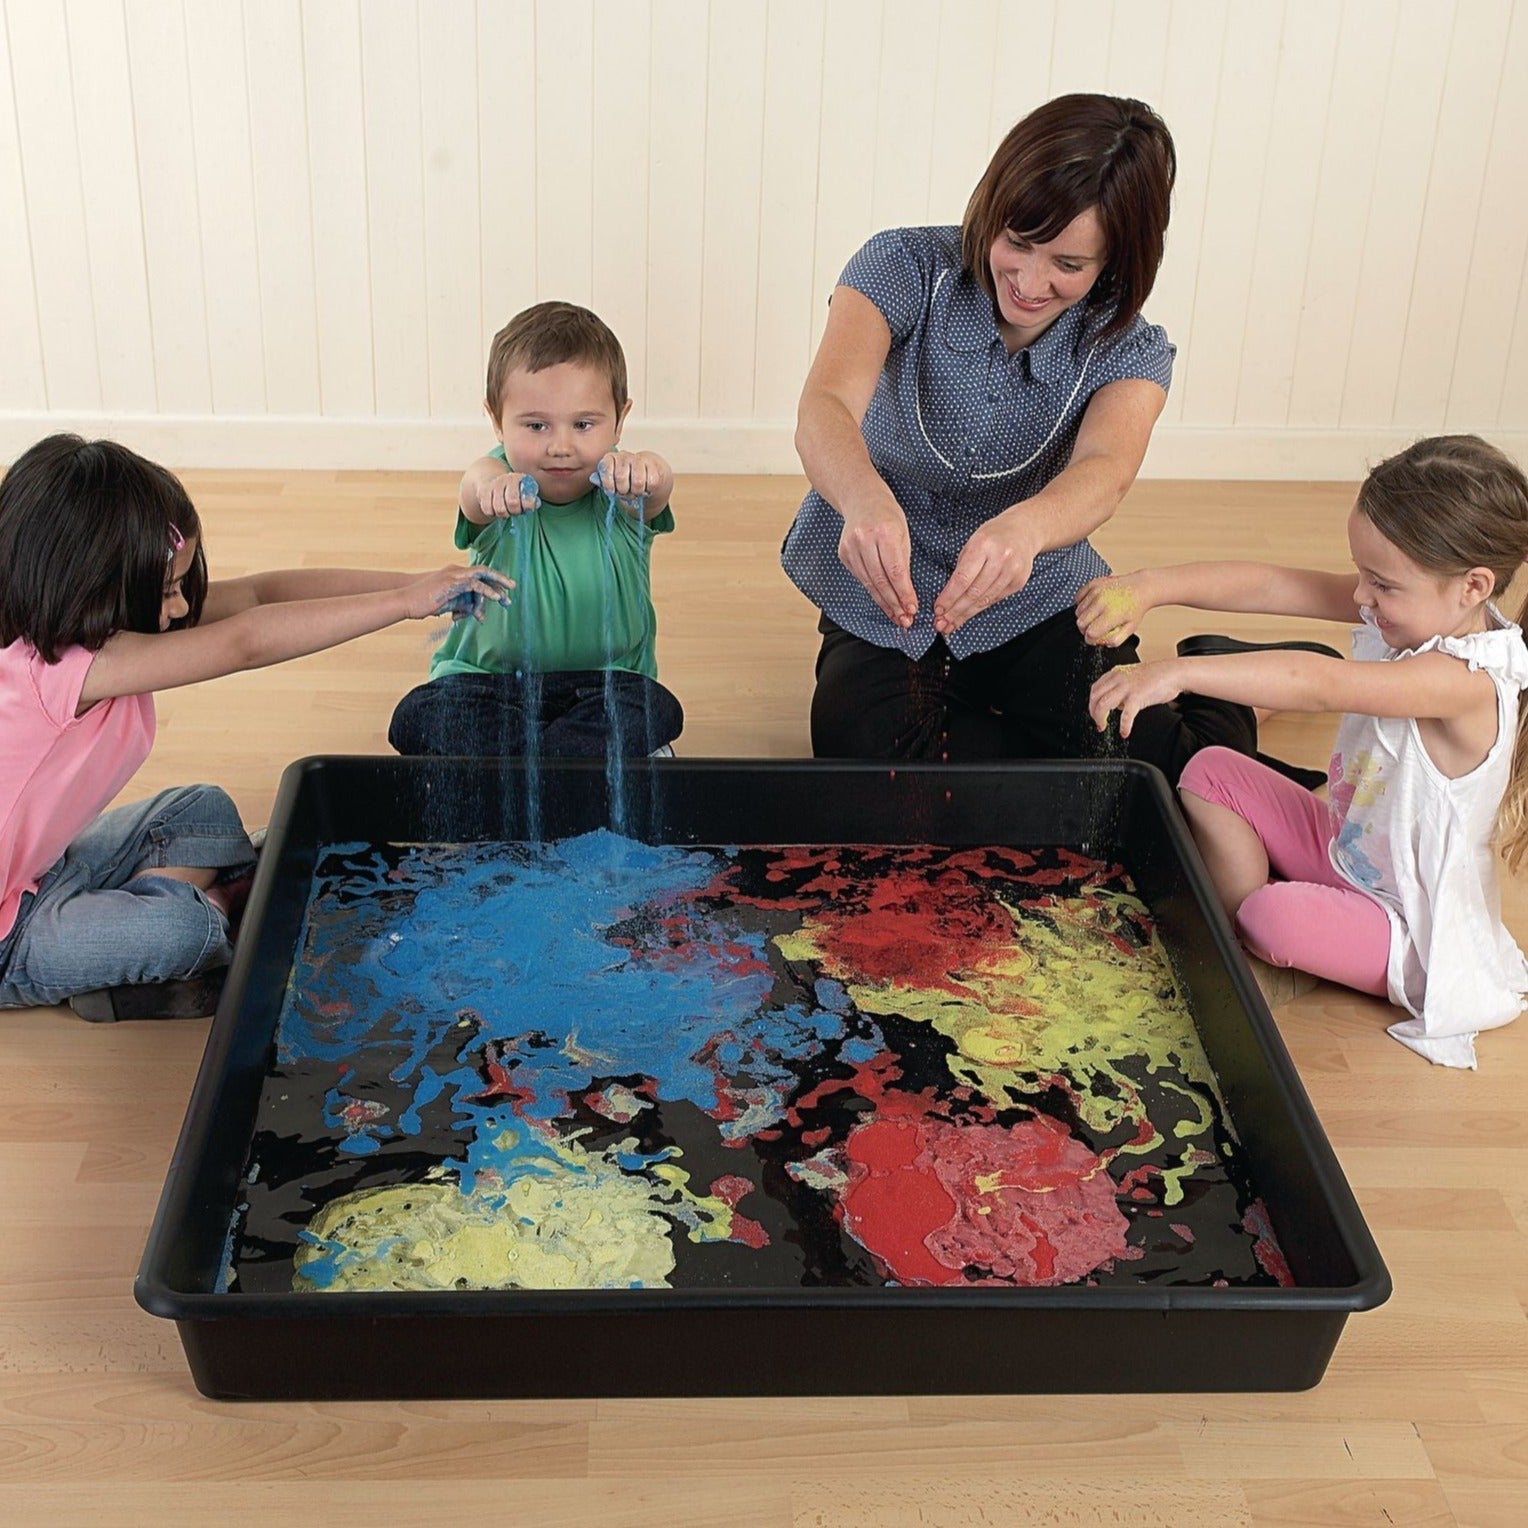 Jumbo Tray -Metre Square, This Jumbo Tray - Large Square is a durable plastic tray that can be used inside or outside. It is lightweight and the perfect size for children to easily move from one location to another. It's large size means that it can be used by several children all at once. It is a versatile resource that can be used in endless ways to support children in all areas of early learning, including: Jumbo Tray Sensory and discovery - create a treasure tray by filling with a range of natural mater